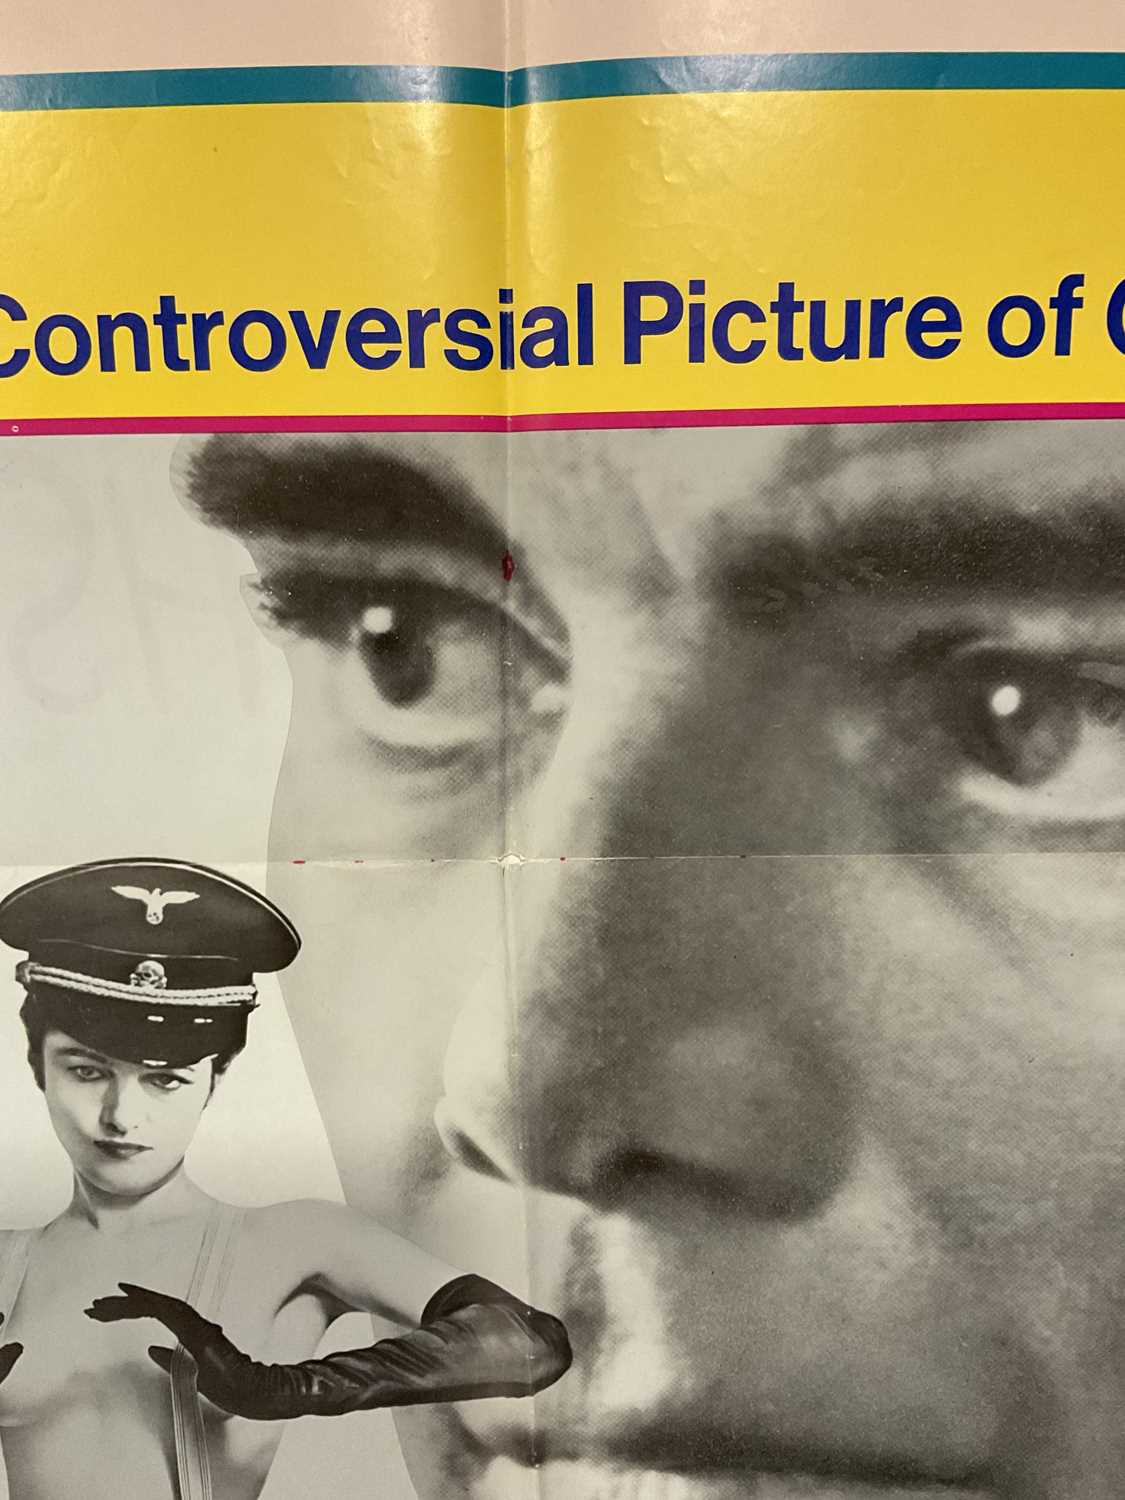 THE NIGHT PORTER (1974) US One sheet, folded. ***Condition*** Graffiti to rear, some holes on folds - Image 5 of 7